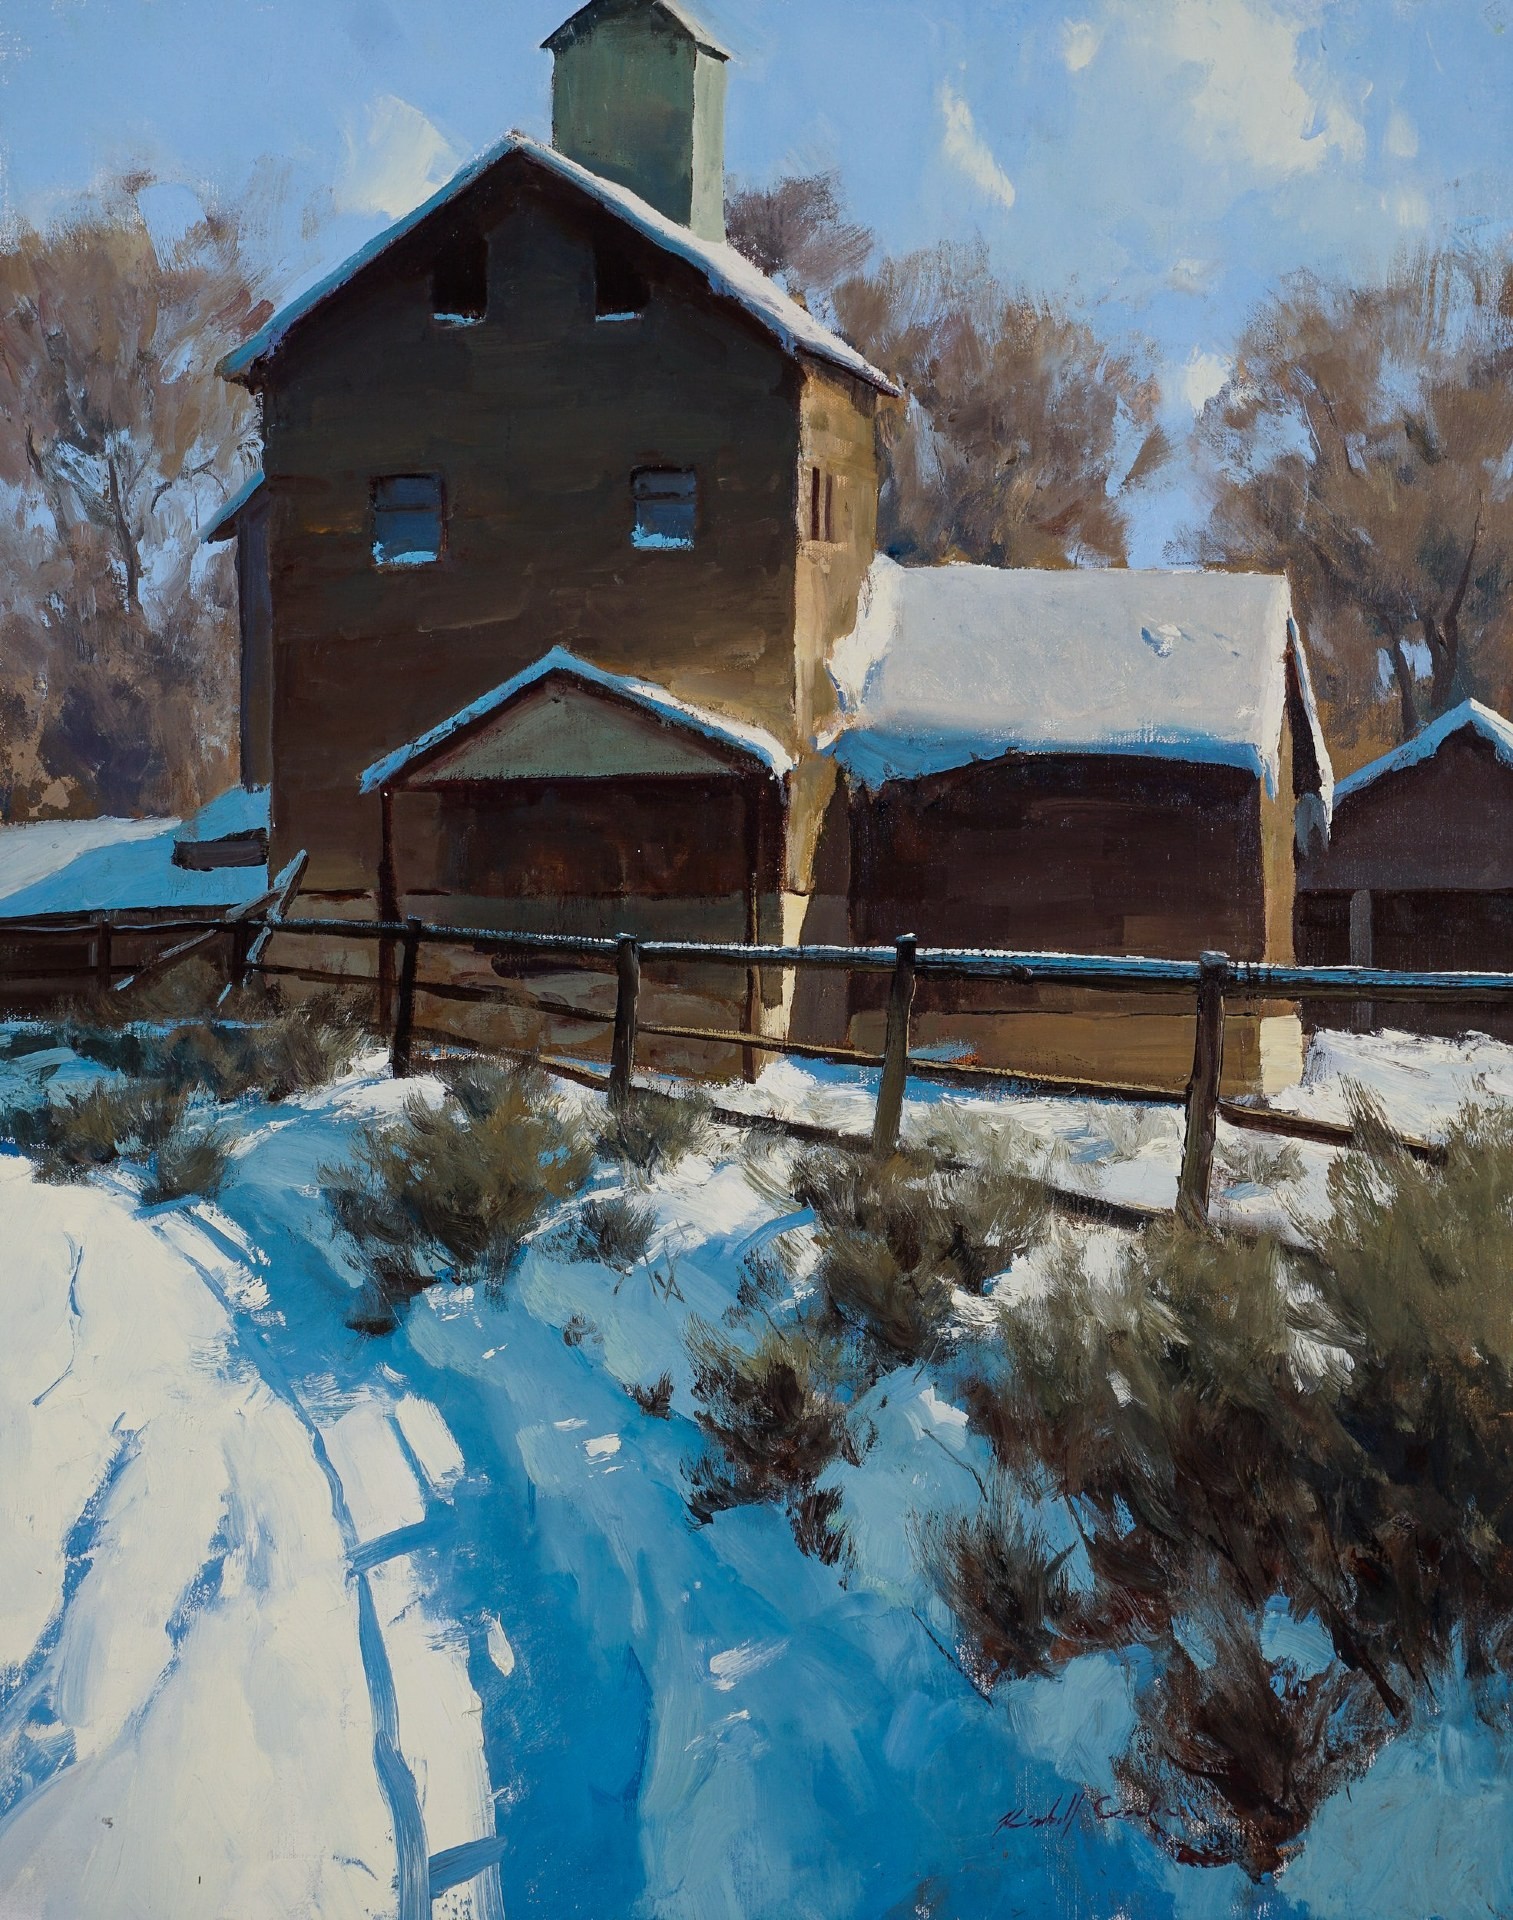 PleinAir Magazine's 12th Annual PleinAir Salon Awards March Top 100 Finalist Kimball Geisler An Old Mill in Winter, Just Outside the Town of Rexburg, ID Building